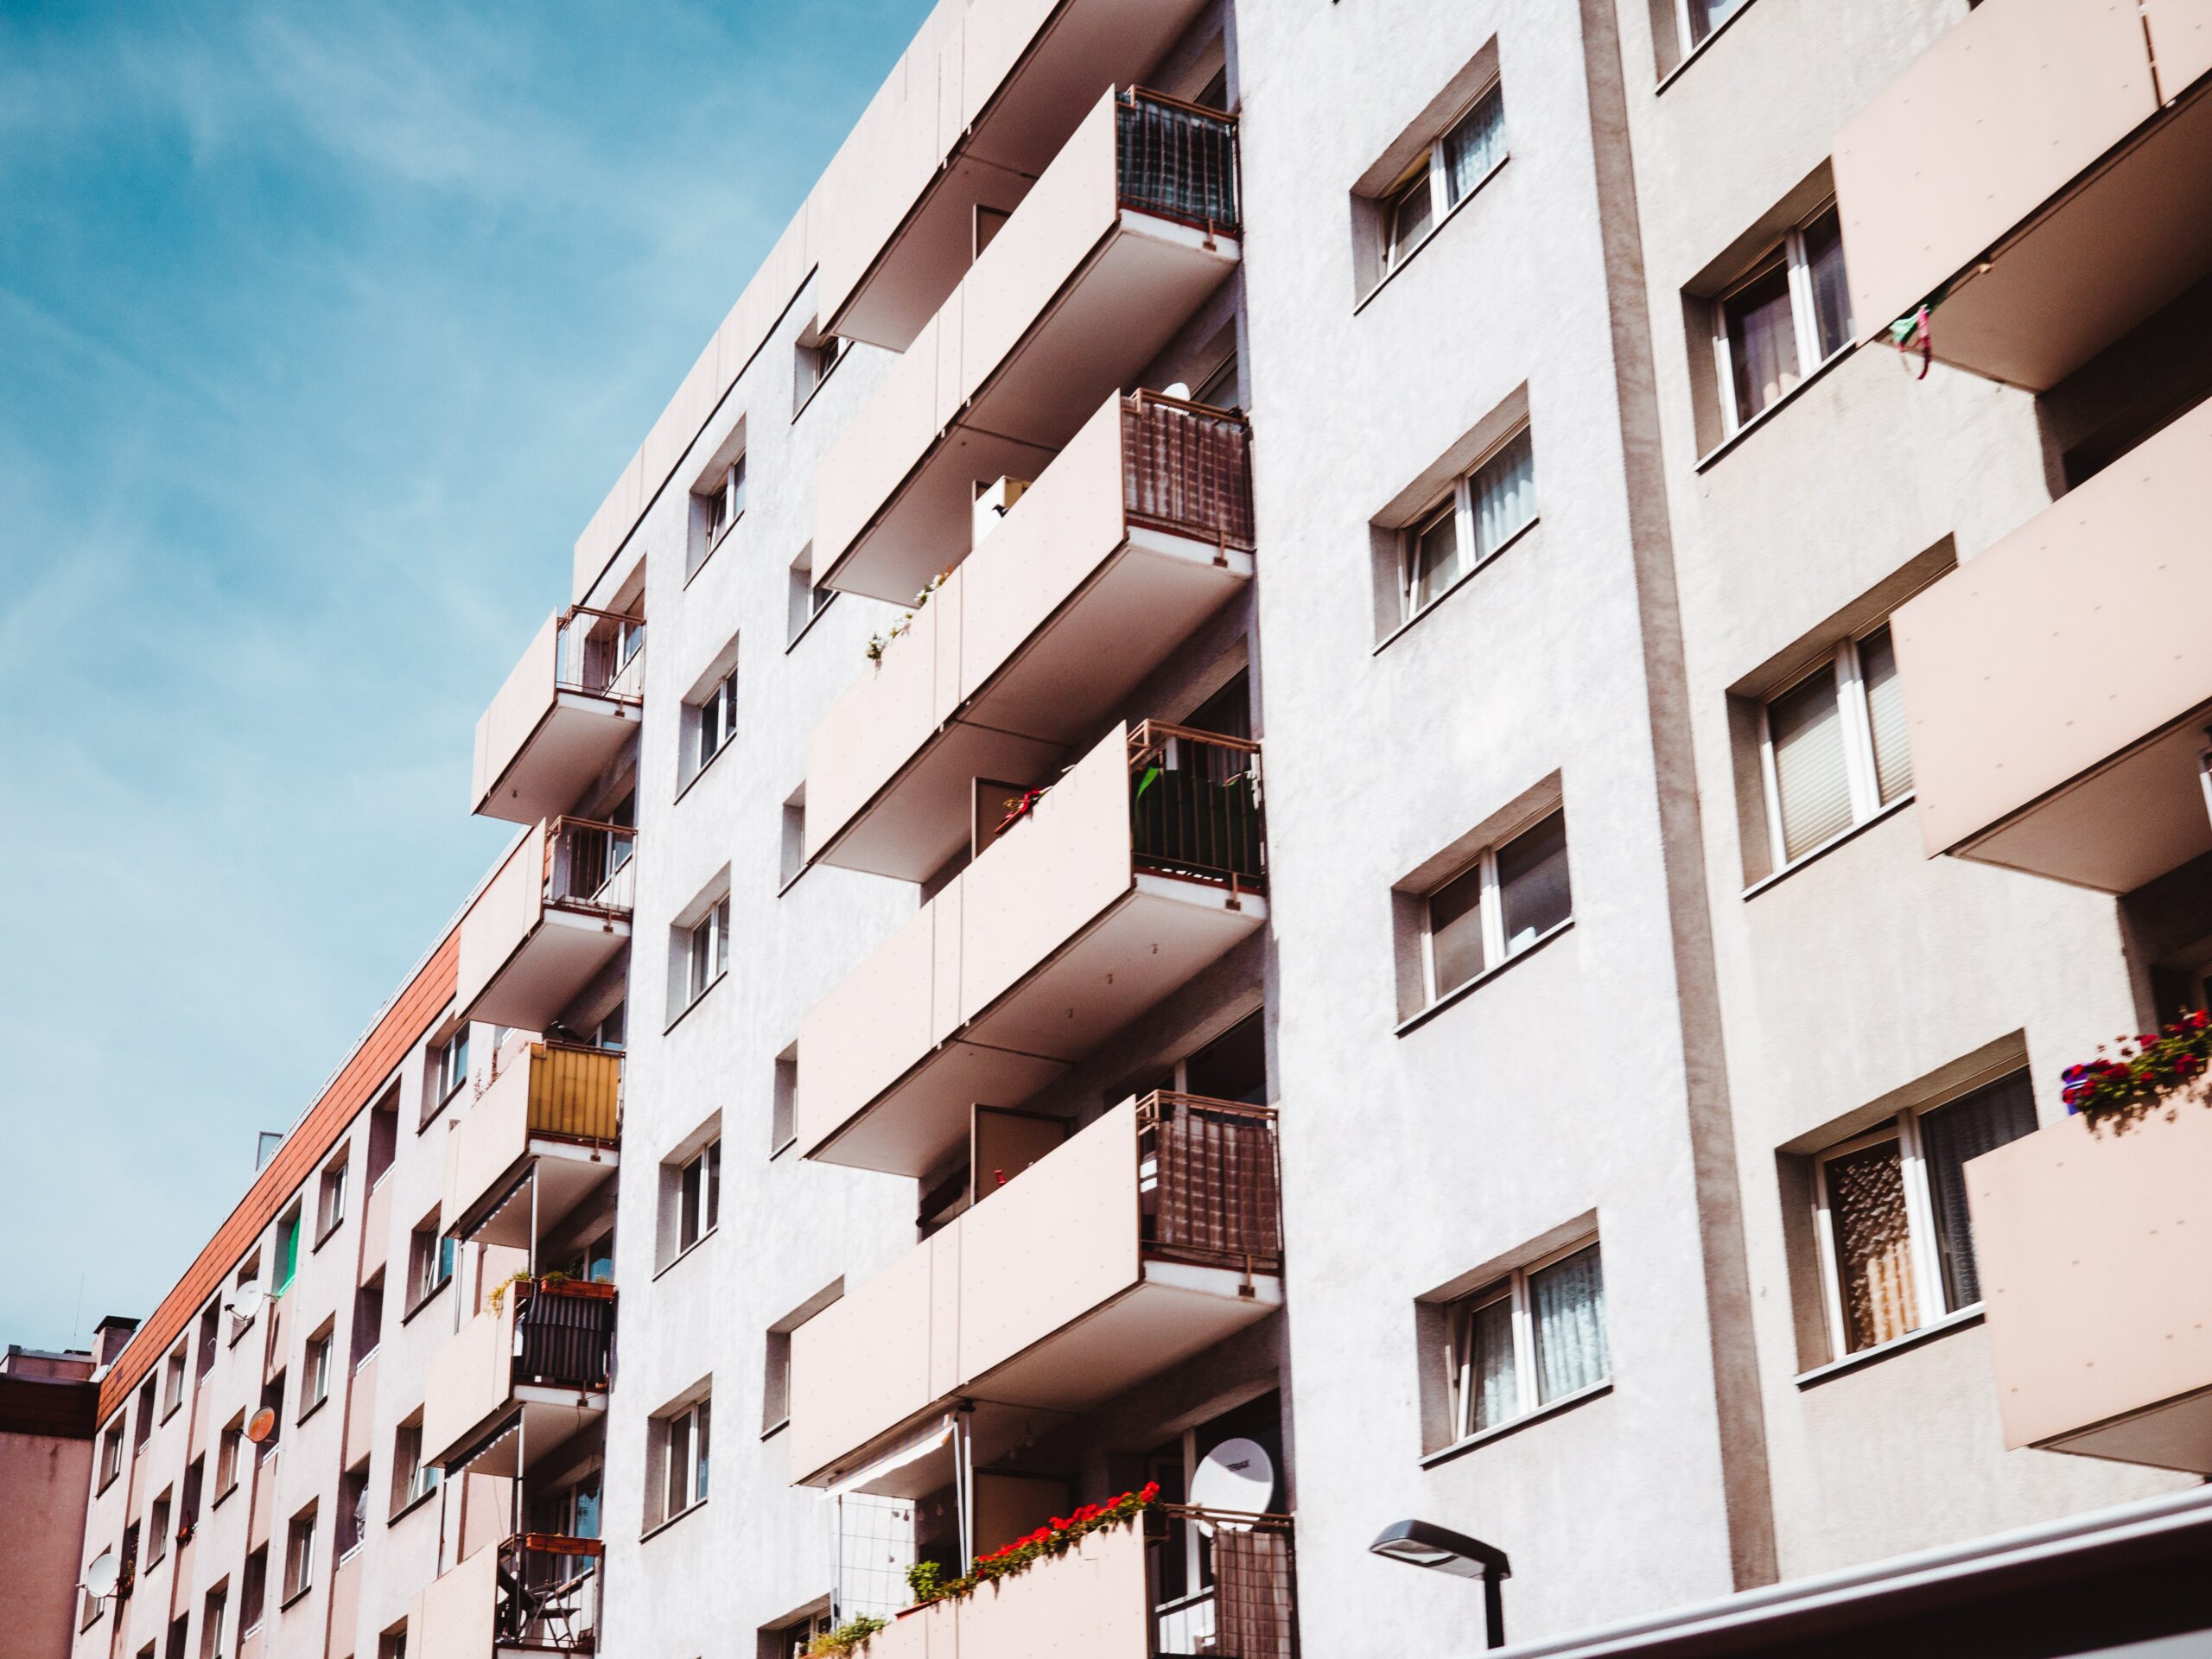 Two Condominium Bylaw Provisions That Every Board Should Review to Ensure that Assessments are not Unnecessarily Depleted